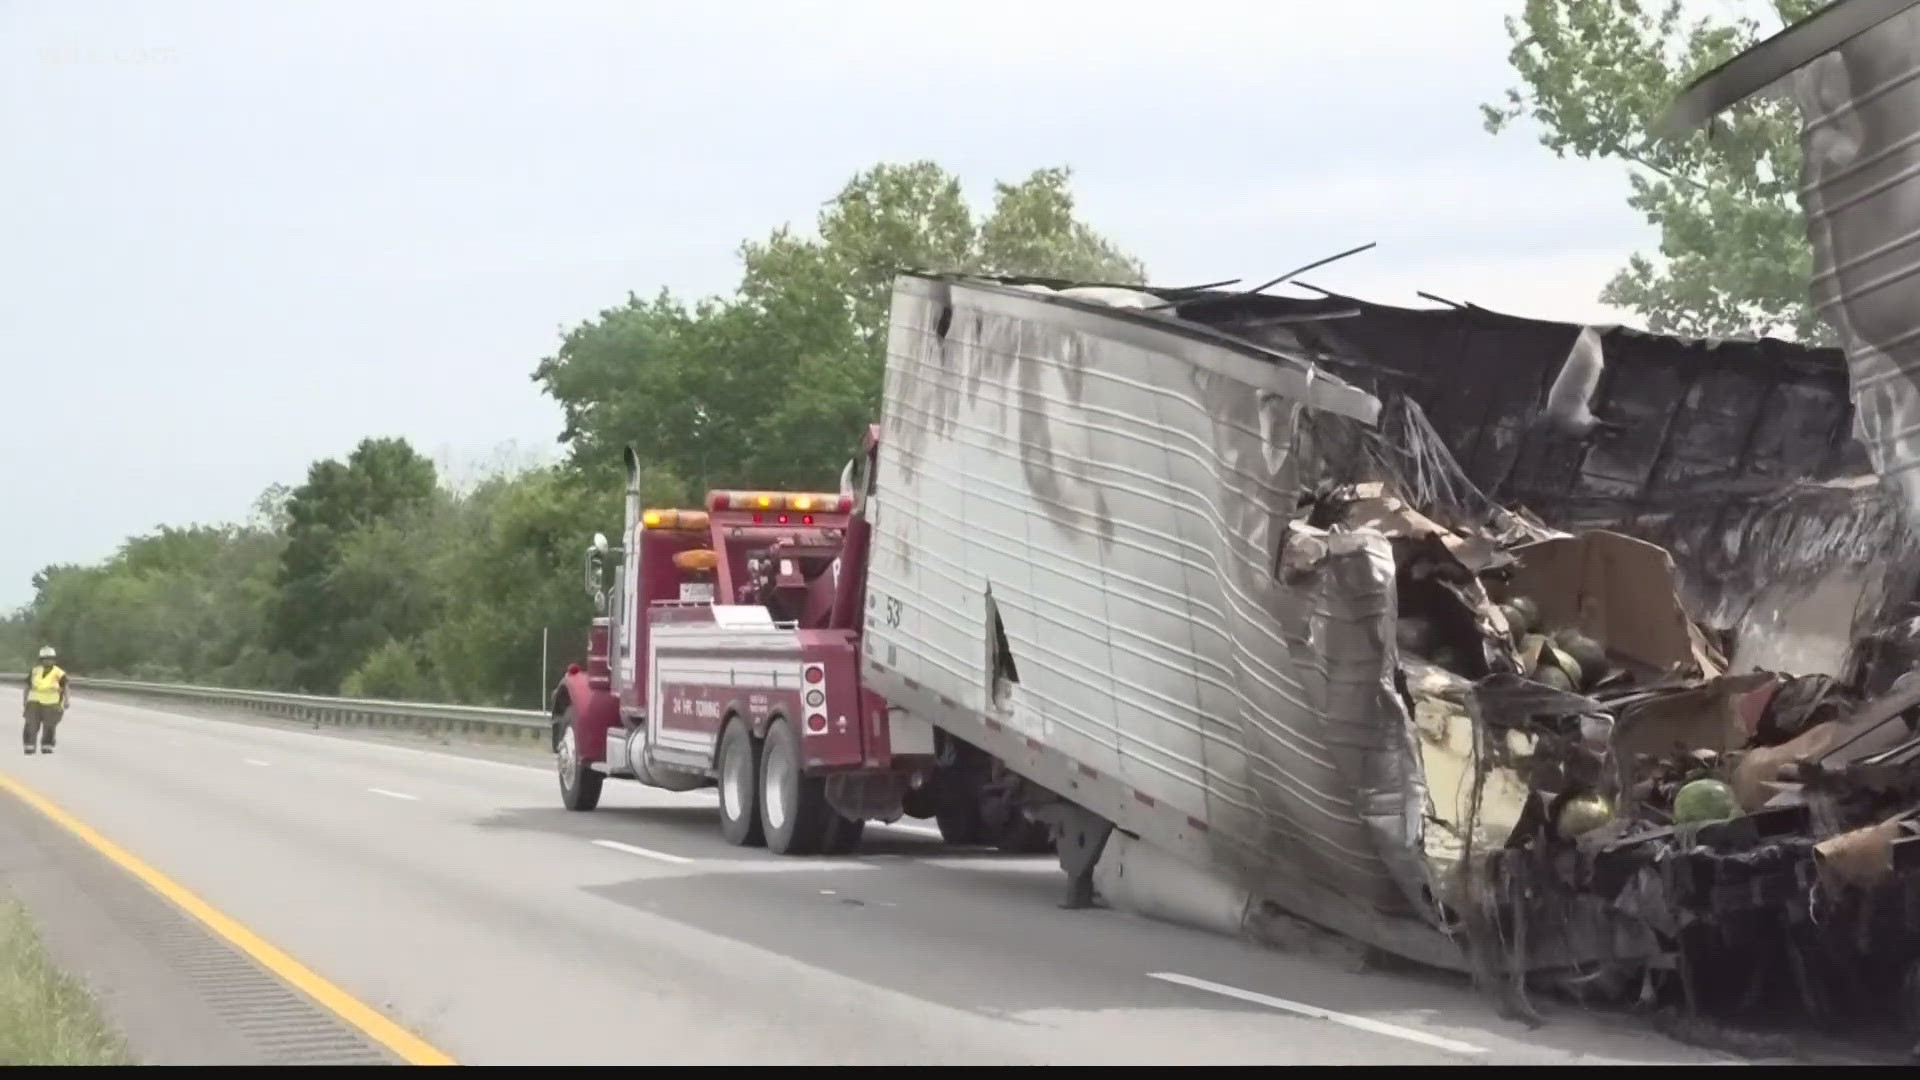 At 7am a tractor trailer carrying watermelons caught fire on I-95 calling for all lanes to be blocked for five miles.